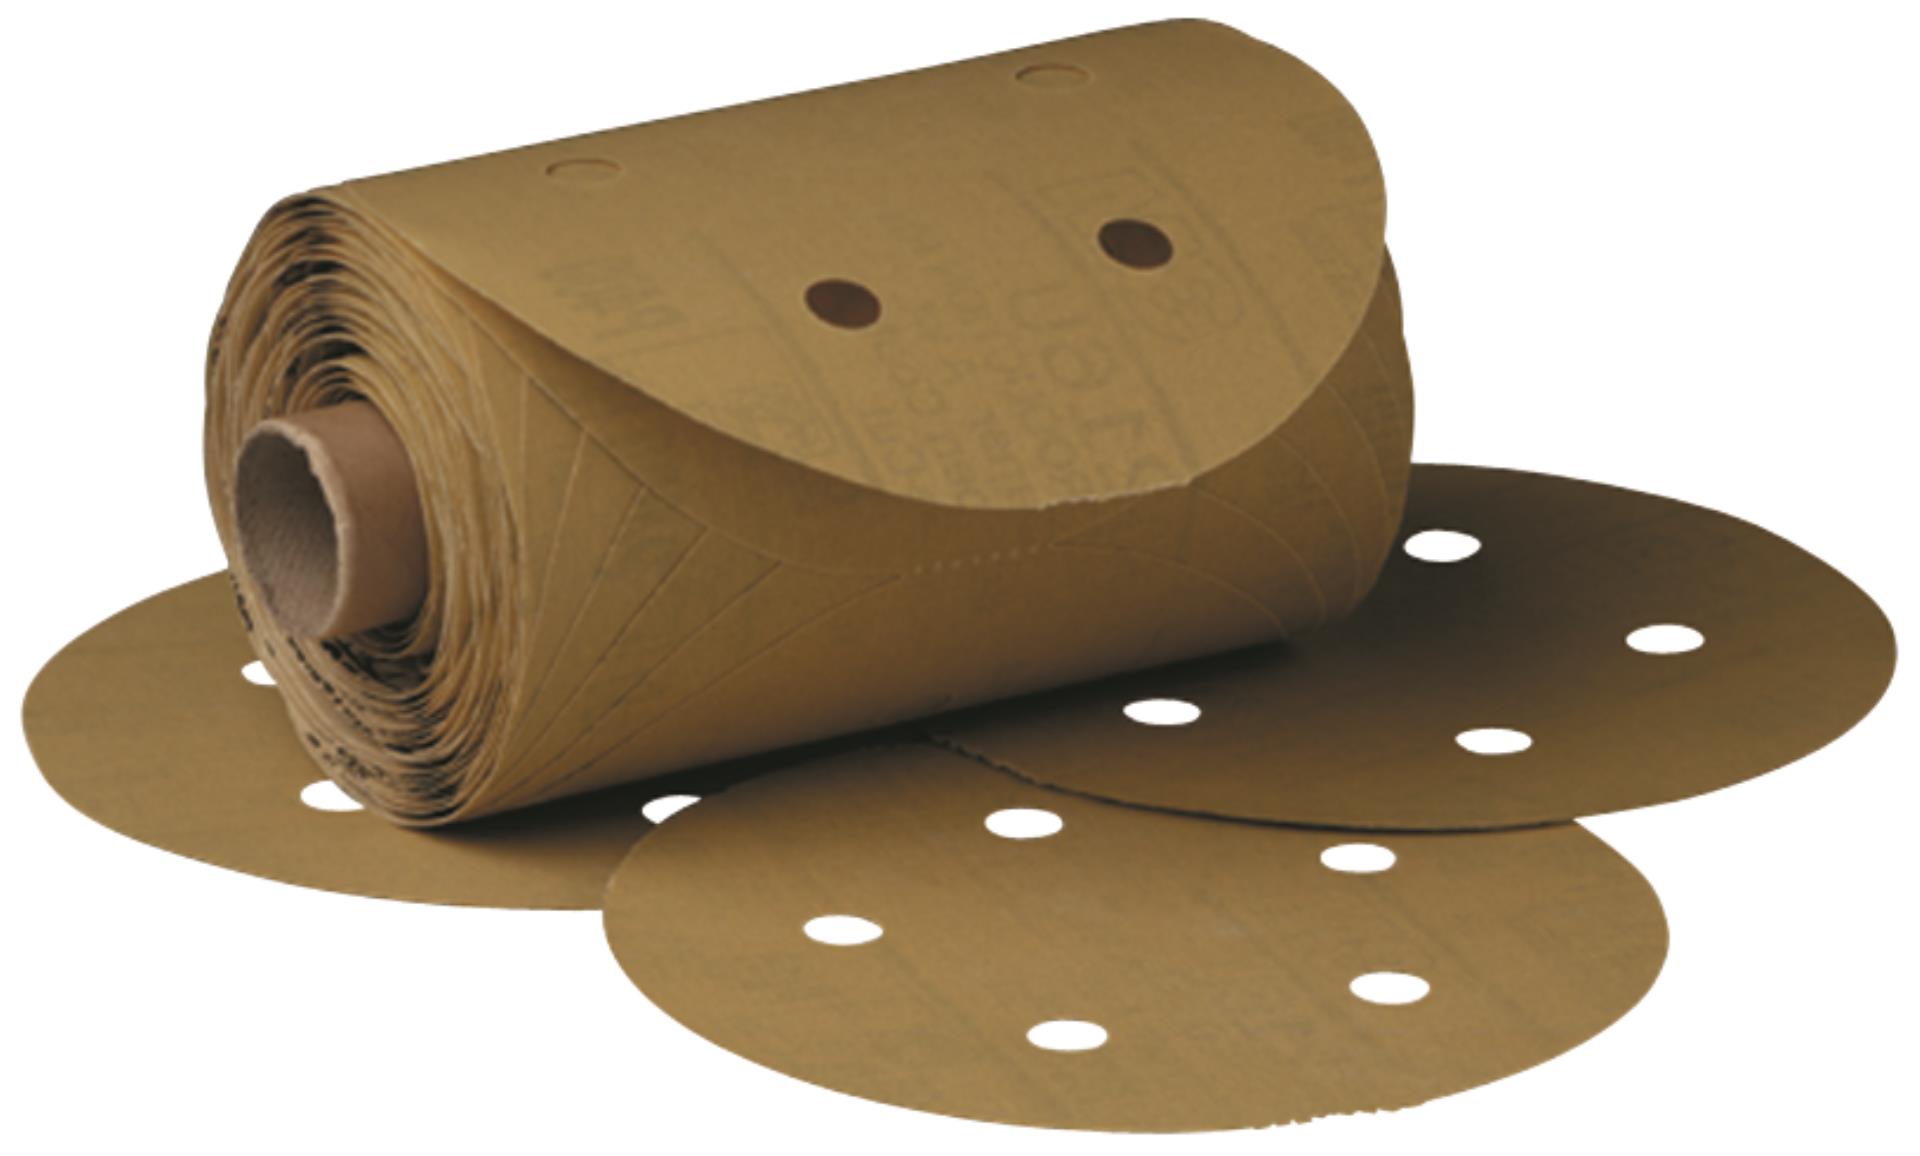 CLEARANCE ROUND Fixing Disc Plate 70 mm x 6.0 mm  3 x11 mm dia holes punched 